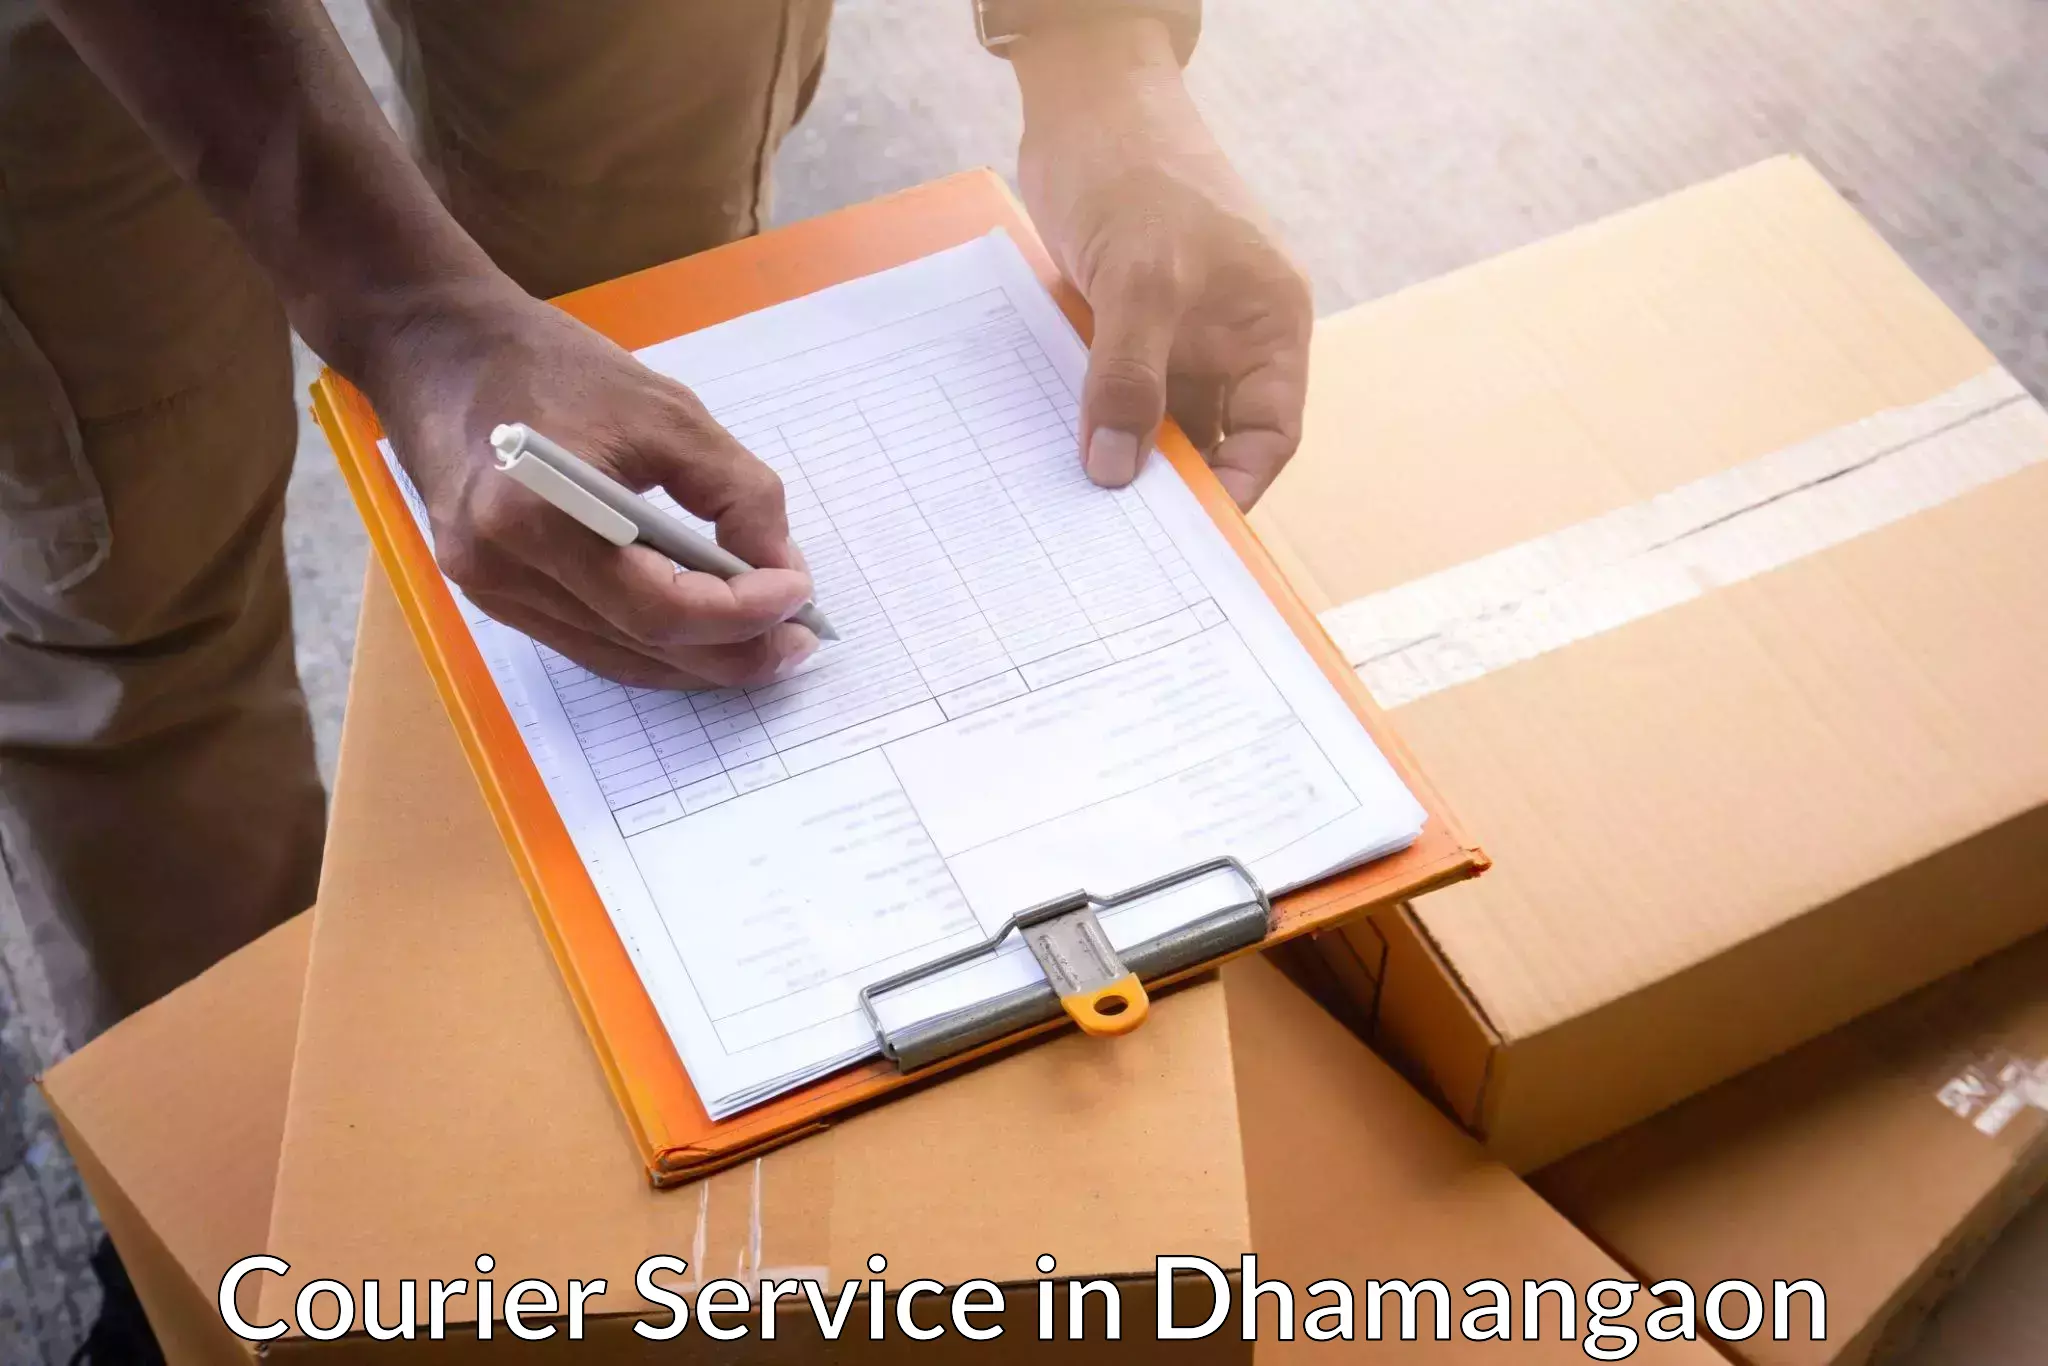 Fast parcel dispatch in Dhamangaon